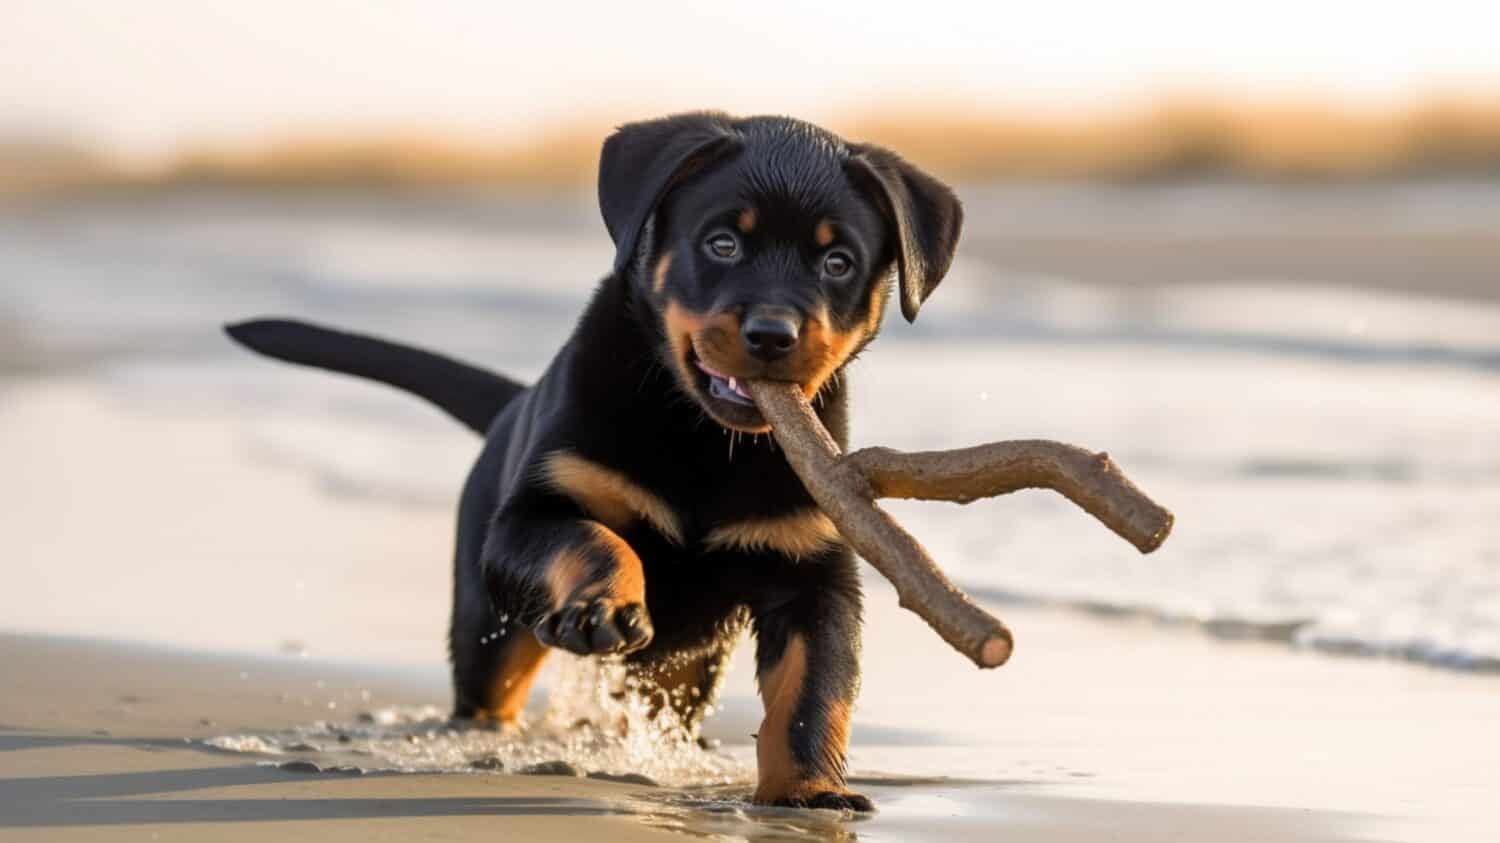 Happy rottweiler puppy running and playing on a beach at sunset. Cute little dog jumping and splashing water. Sand play.